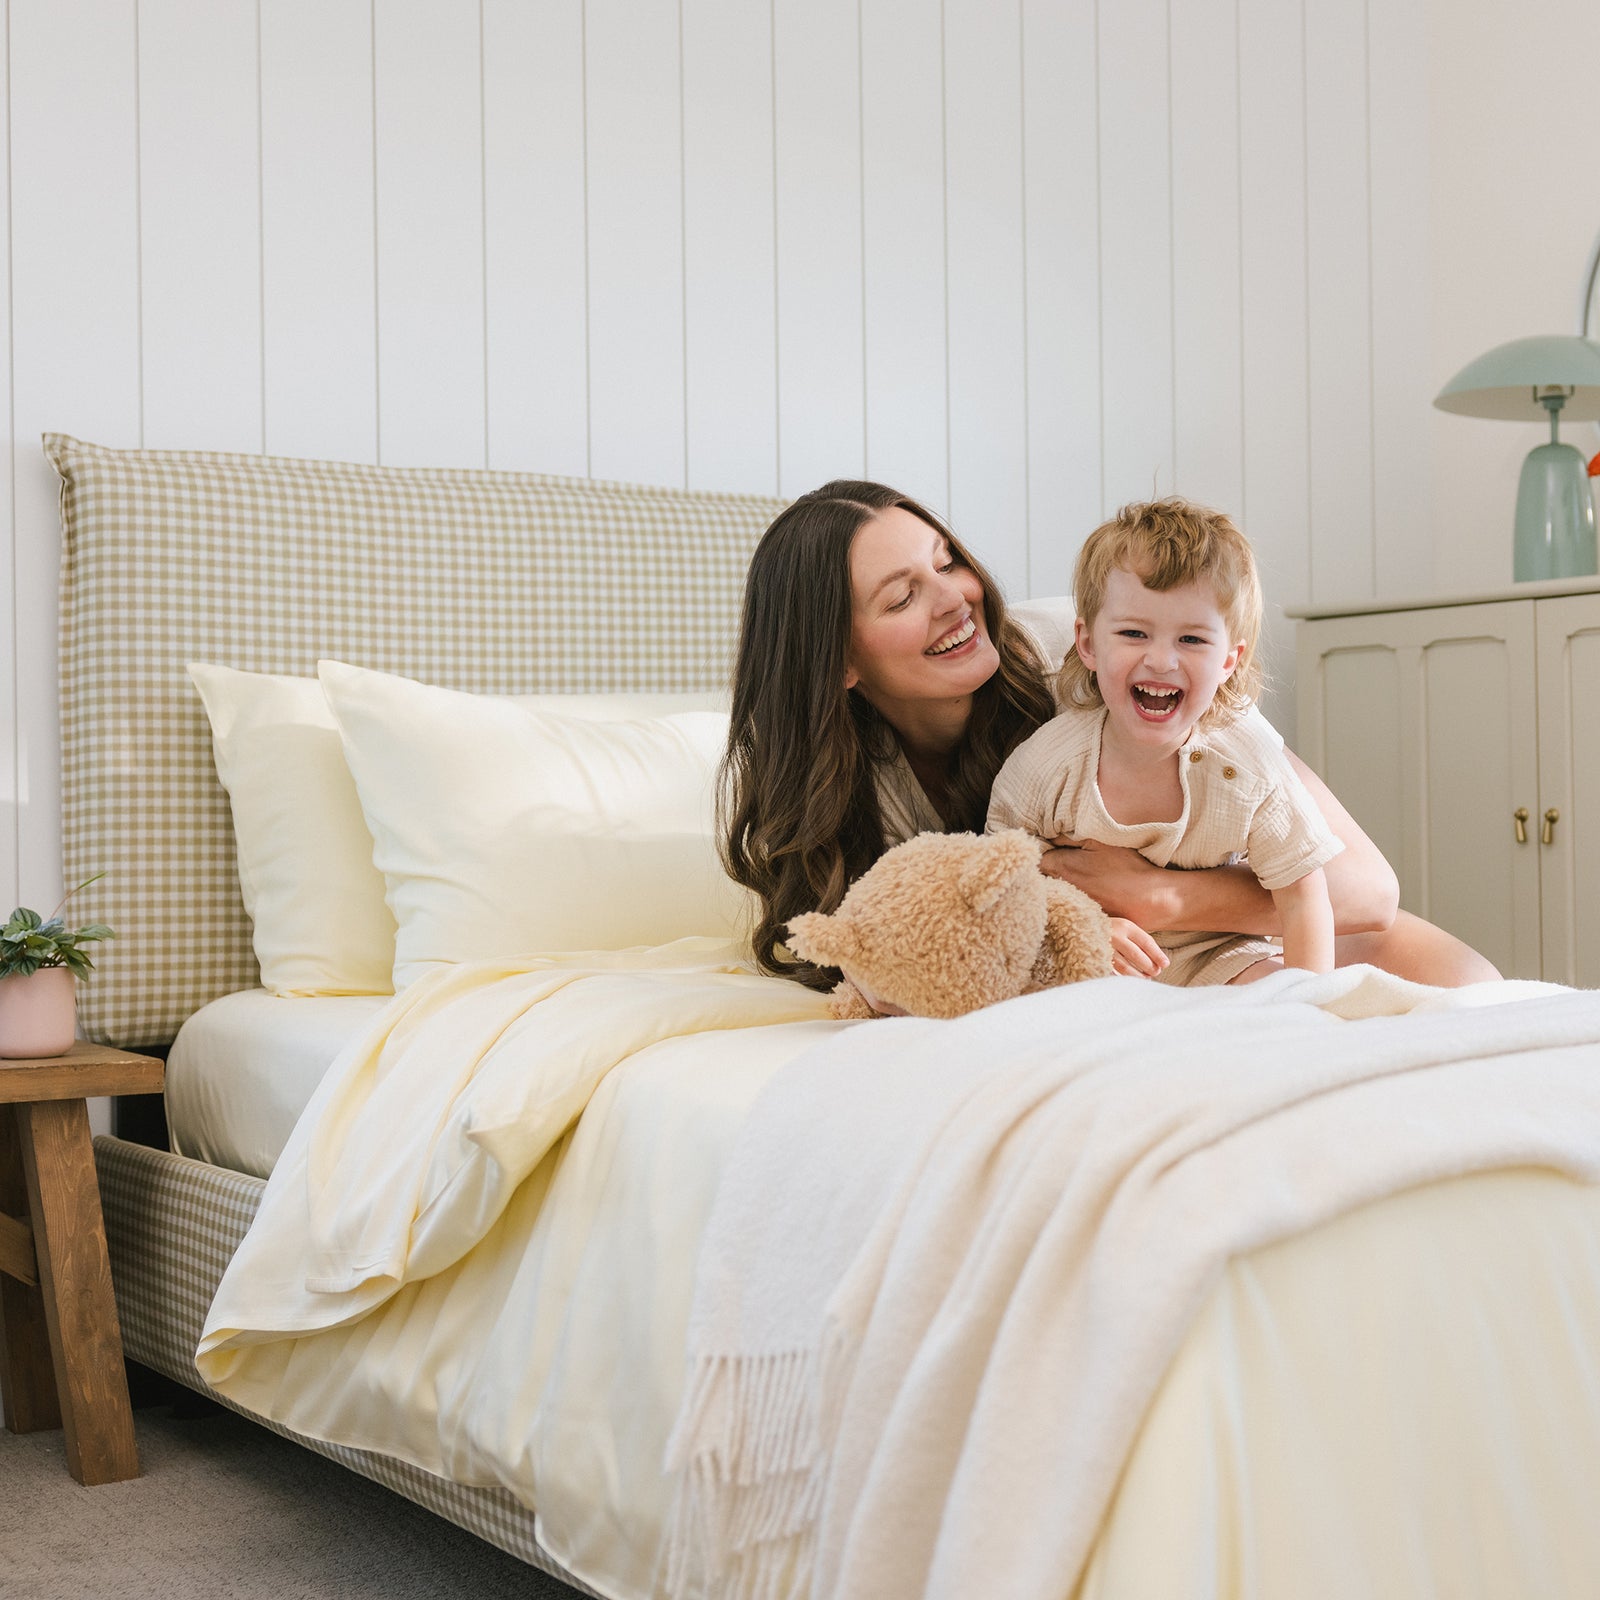 Women with boy smiling on bed with lemonade bedding 